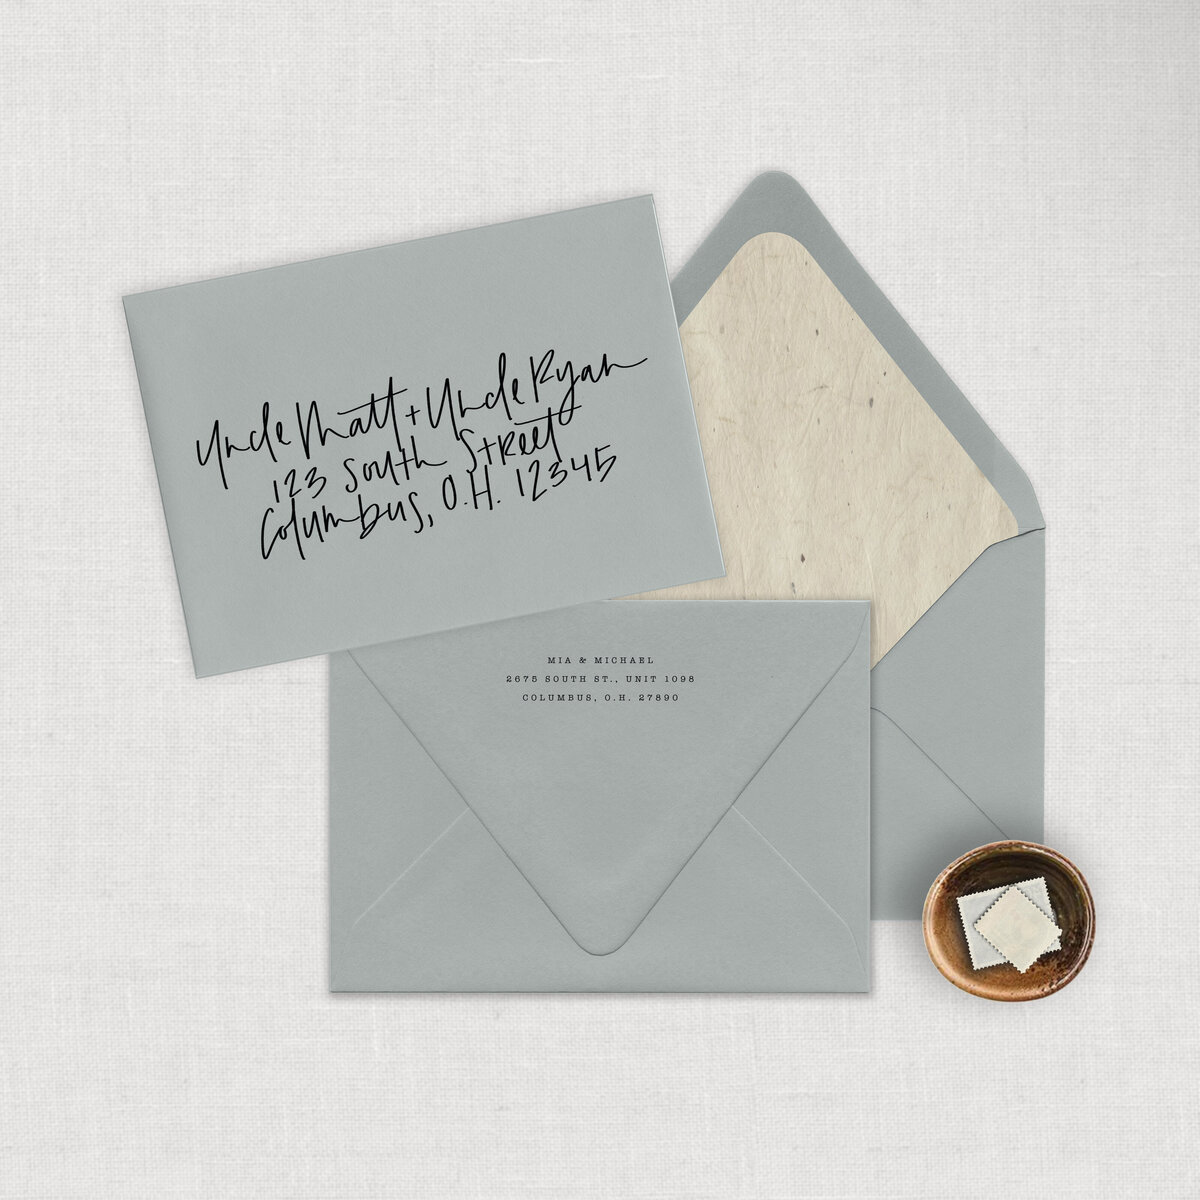 Calligraphy Wedding Mailing Envelope with printed return address and inserted textured envelope liner.